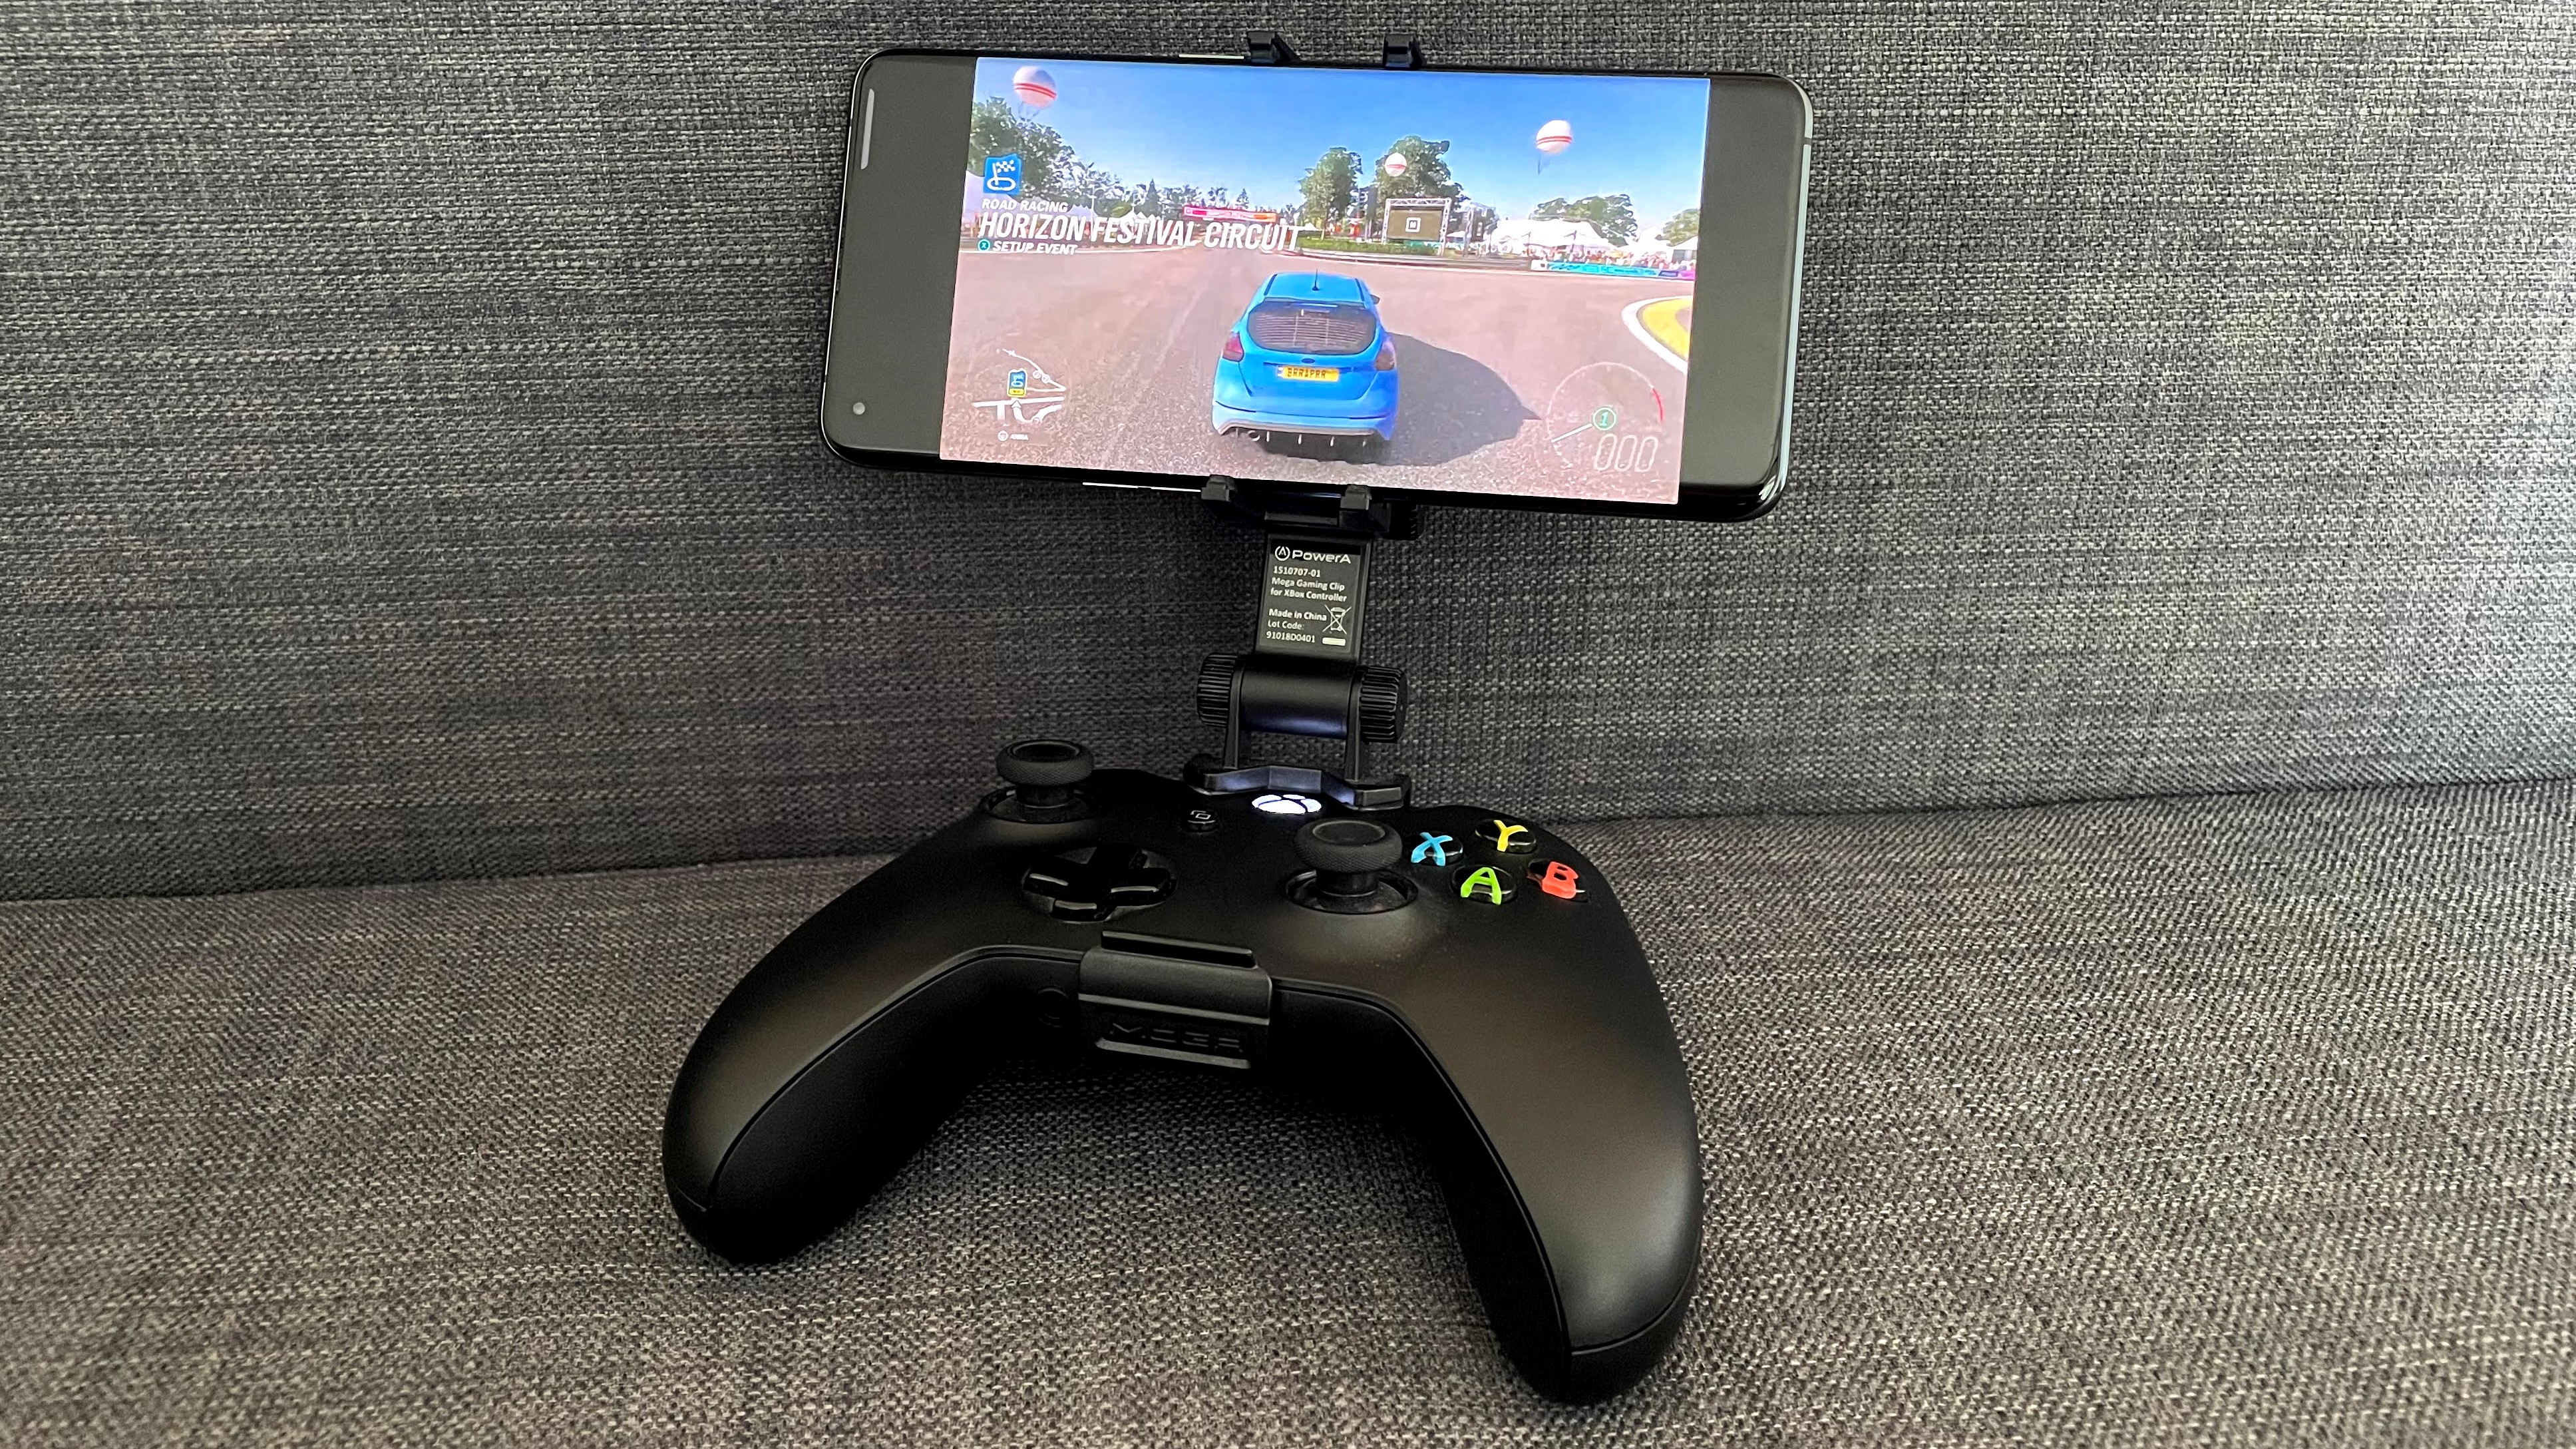 ingeniero restaurante amenazar How to connect an Xbox Wireless Controller to Android | Tom's Guide